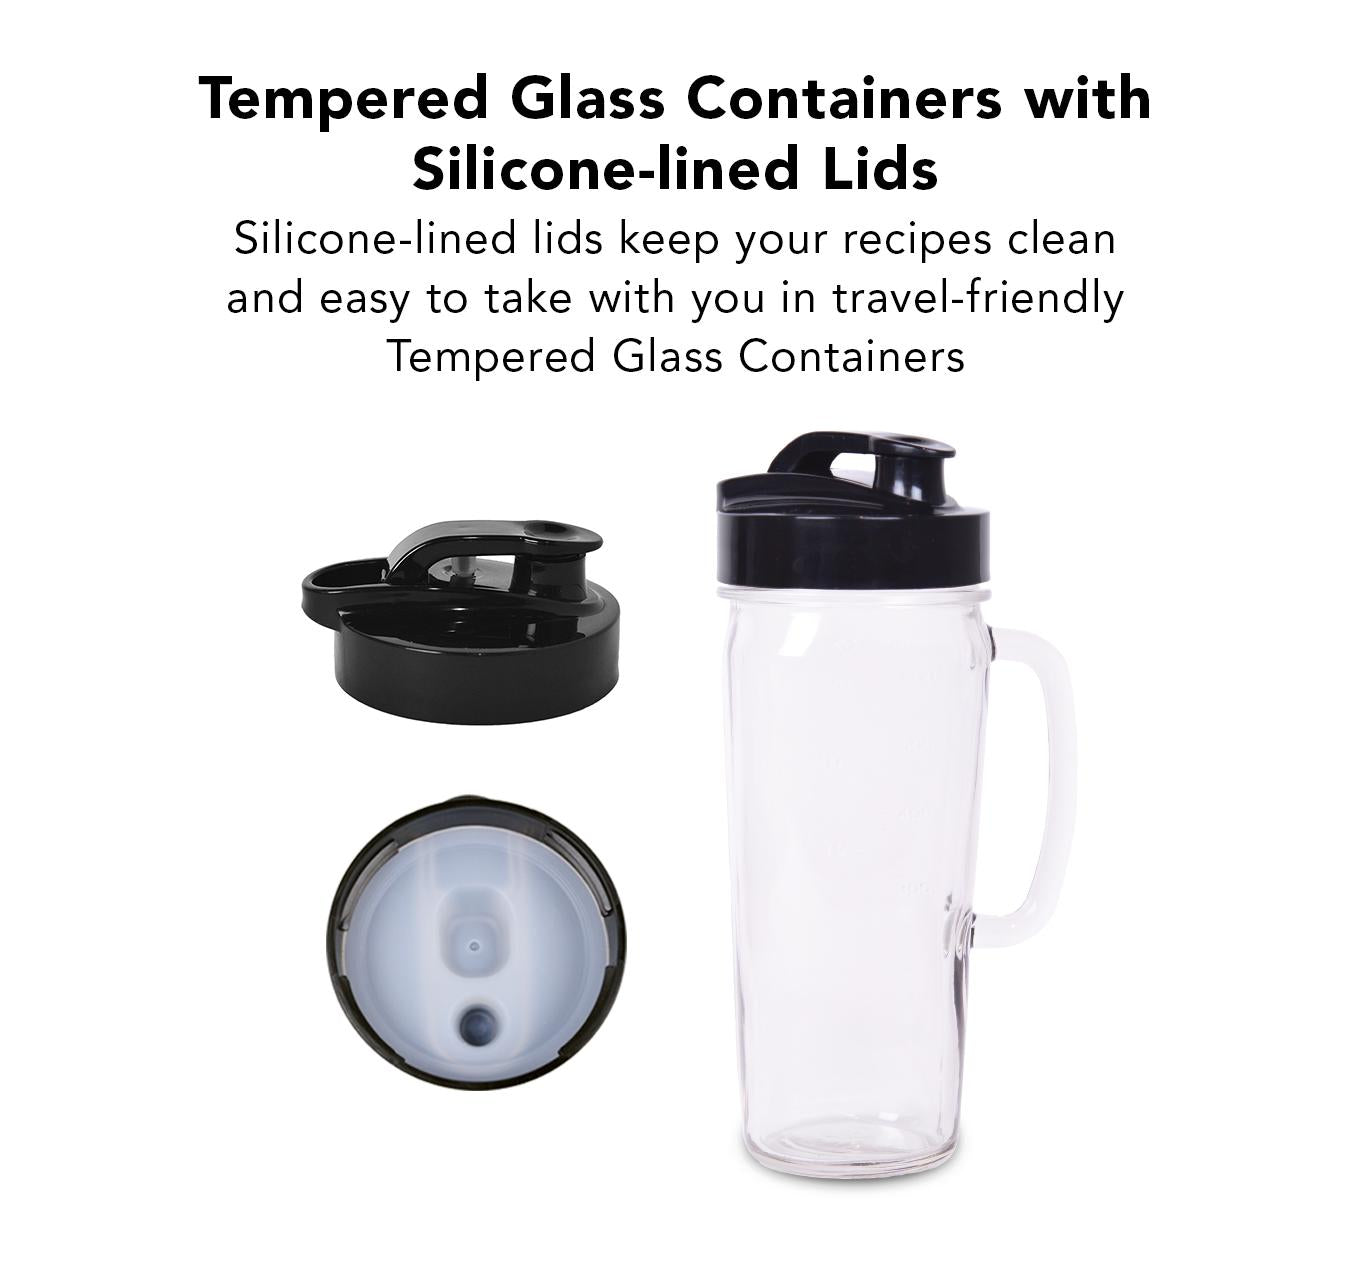 Tribest PBG-5050-A Glass Personal Blender Review - Consumer Reports